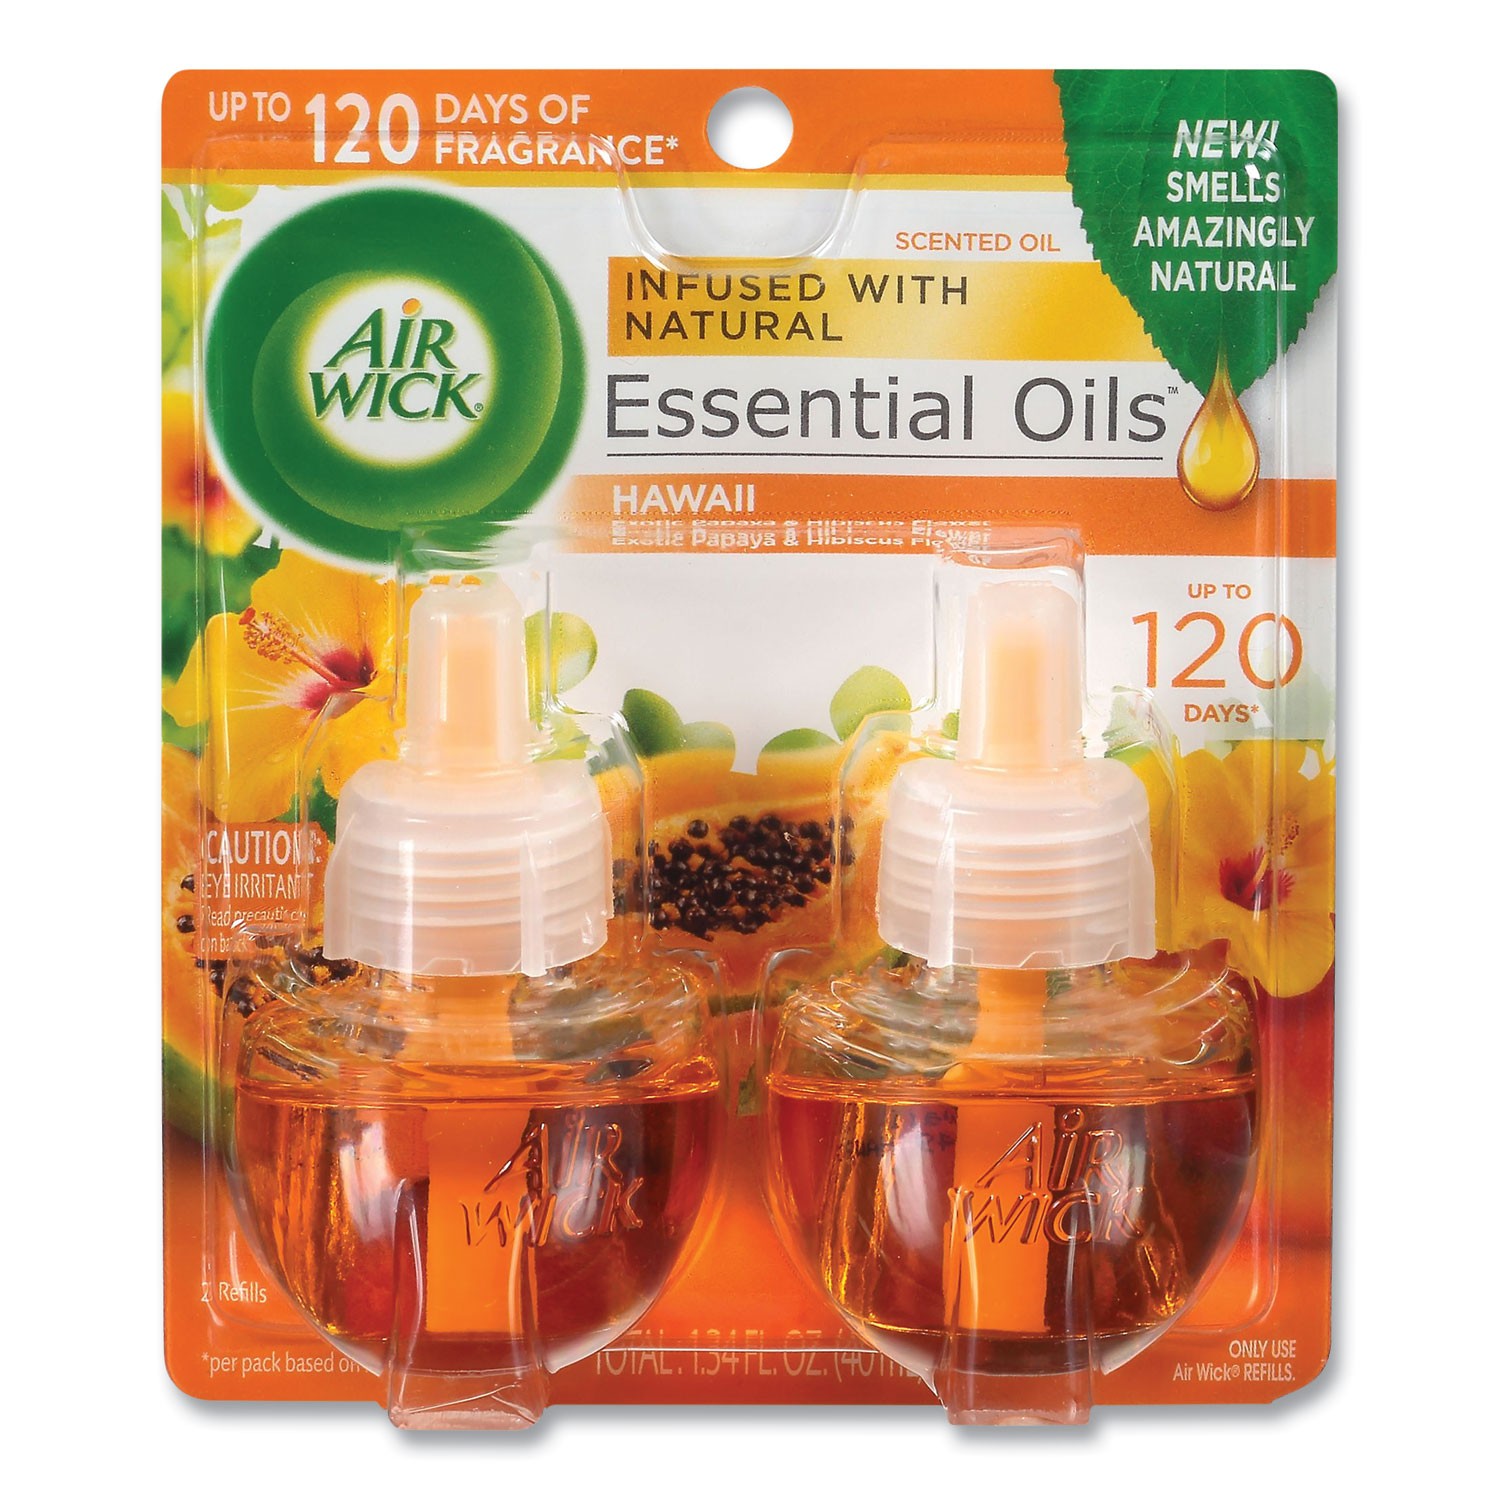 AIR WICK® Scented Oil - Fresh Linen (Discontinued)